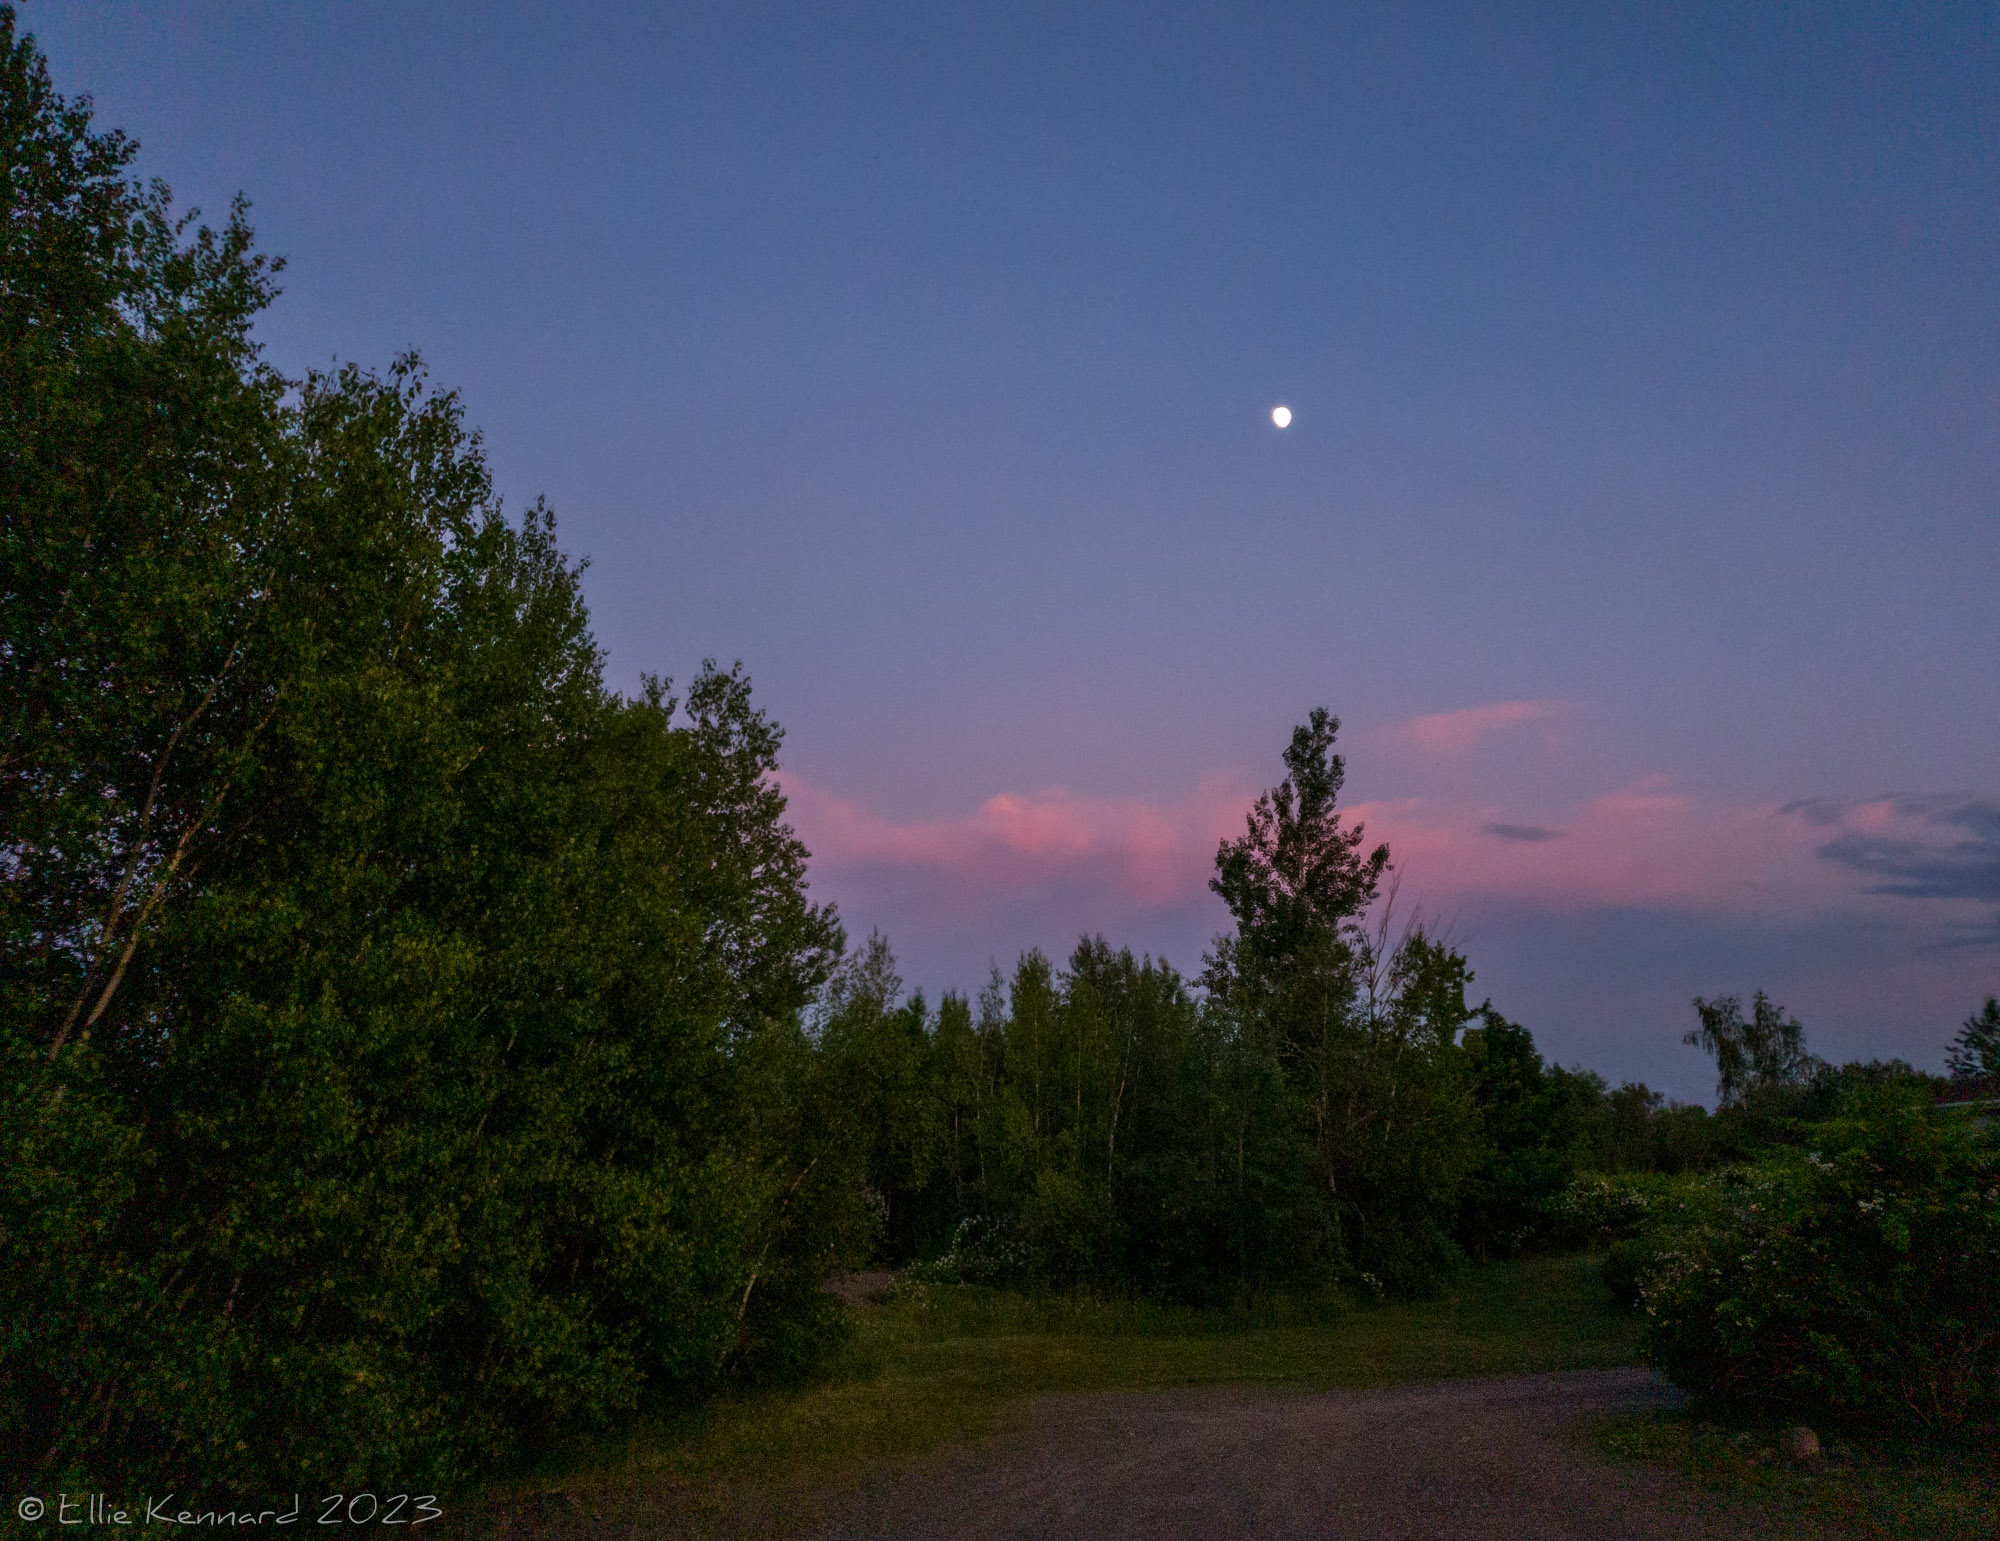 A darkening evening blue sky is shown above pink sunset reflection clouds that are low on the horizon. The full moon, not large, is directly above a tall tree that stands above the others around it in the middle ground. There are trees to the left of the image, low flowered bushes to the right and a dirt road or drive curves to the left behind the bushes.